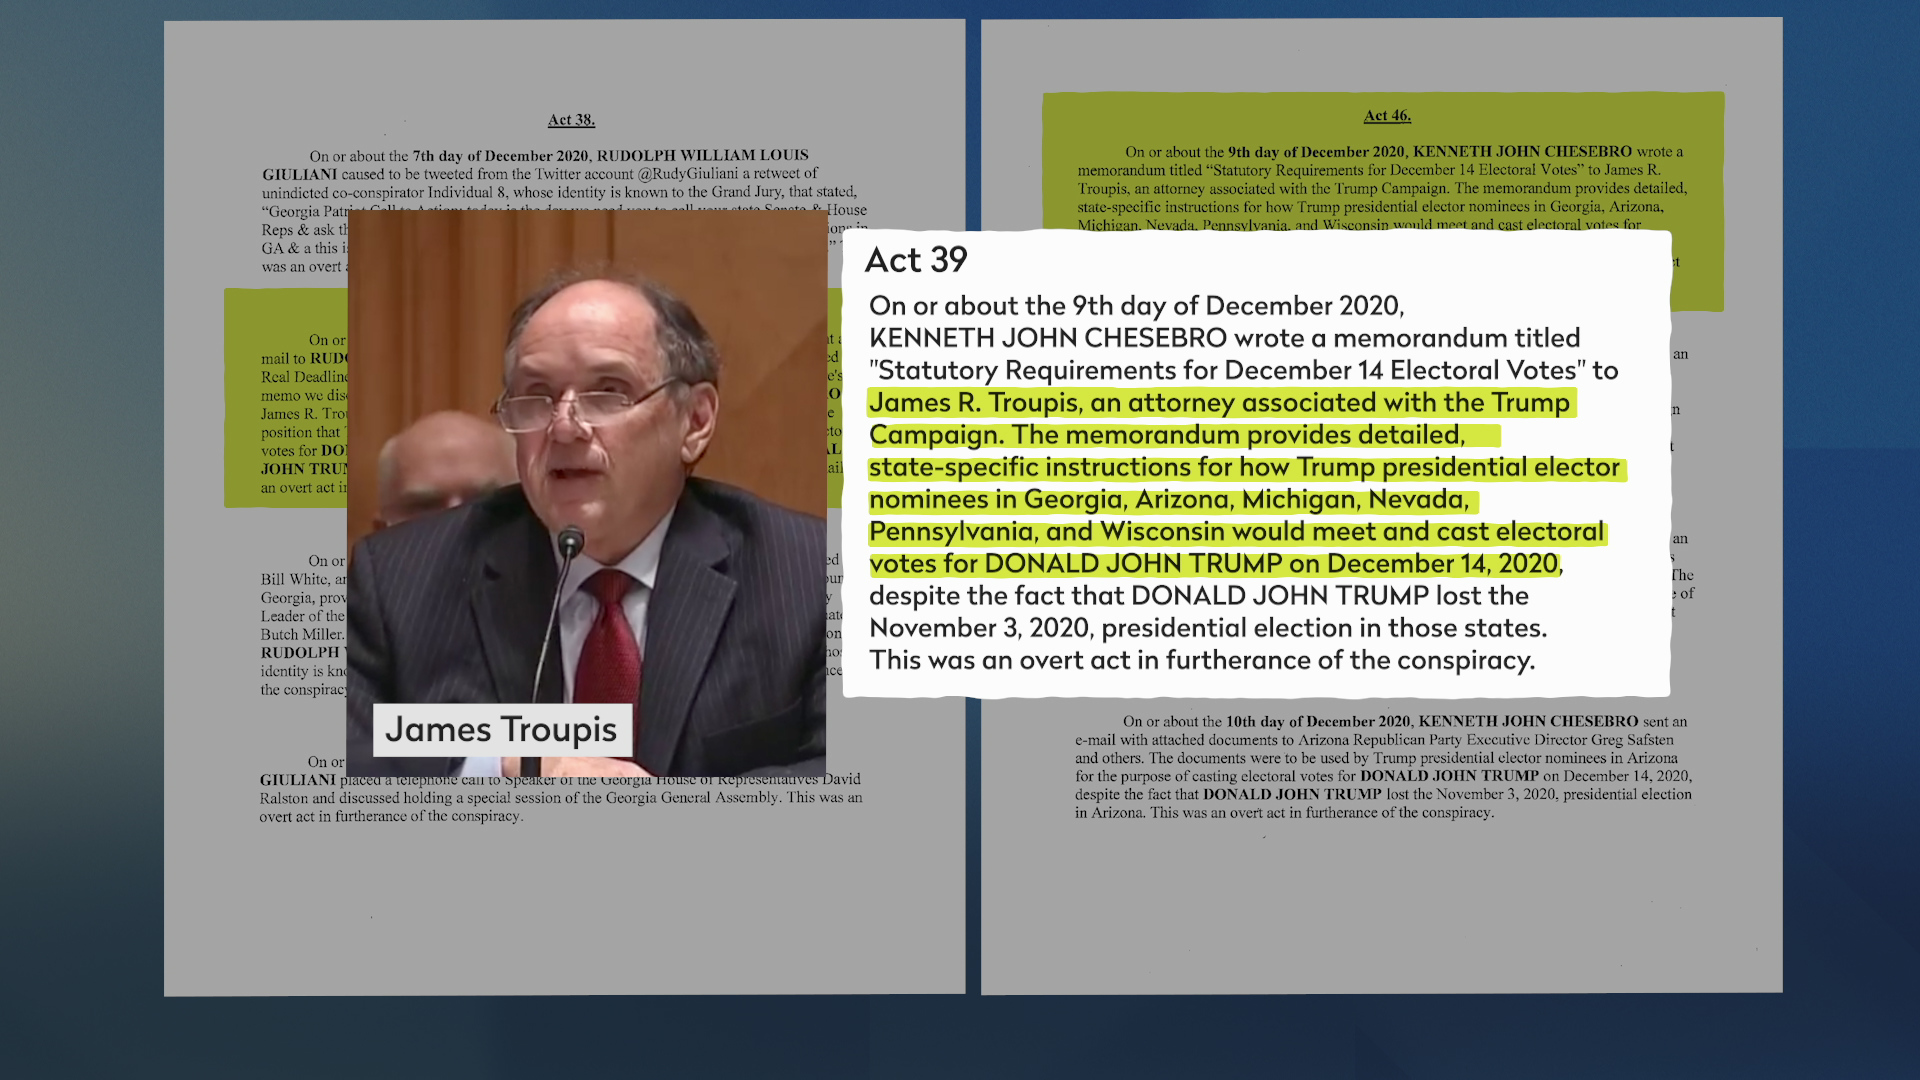 A graphic showing a portrait of James Troupis and highlighted portions of two pages of a document features lines that read, "On or about the 9th day of December 2020, KENNETH JOHN CHESEBRO wrote a memorandum titled "Statutory Requirements for December 14 Electoral Votes" to James R. Troupis, an attorney associated with the Trump campaign. The memorandum provides detailed, state-specific instructions for how Trump presidential elector nominees in Georgia, Arizona, Michigan, Nevada, Pennsylvania and Wisconsin would meet and cast electoral votes for DONALD JOHN TRUMP on December 14, 2020," despite the fact that DONALD JOHN TRUMP lost the November 3, 2020, presidential election in those states. This was an overt act in furtherance of the conspiracy."